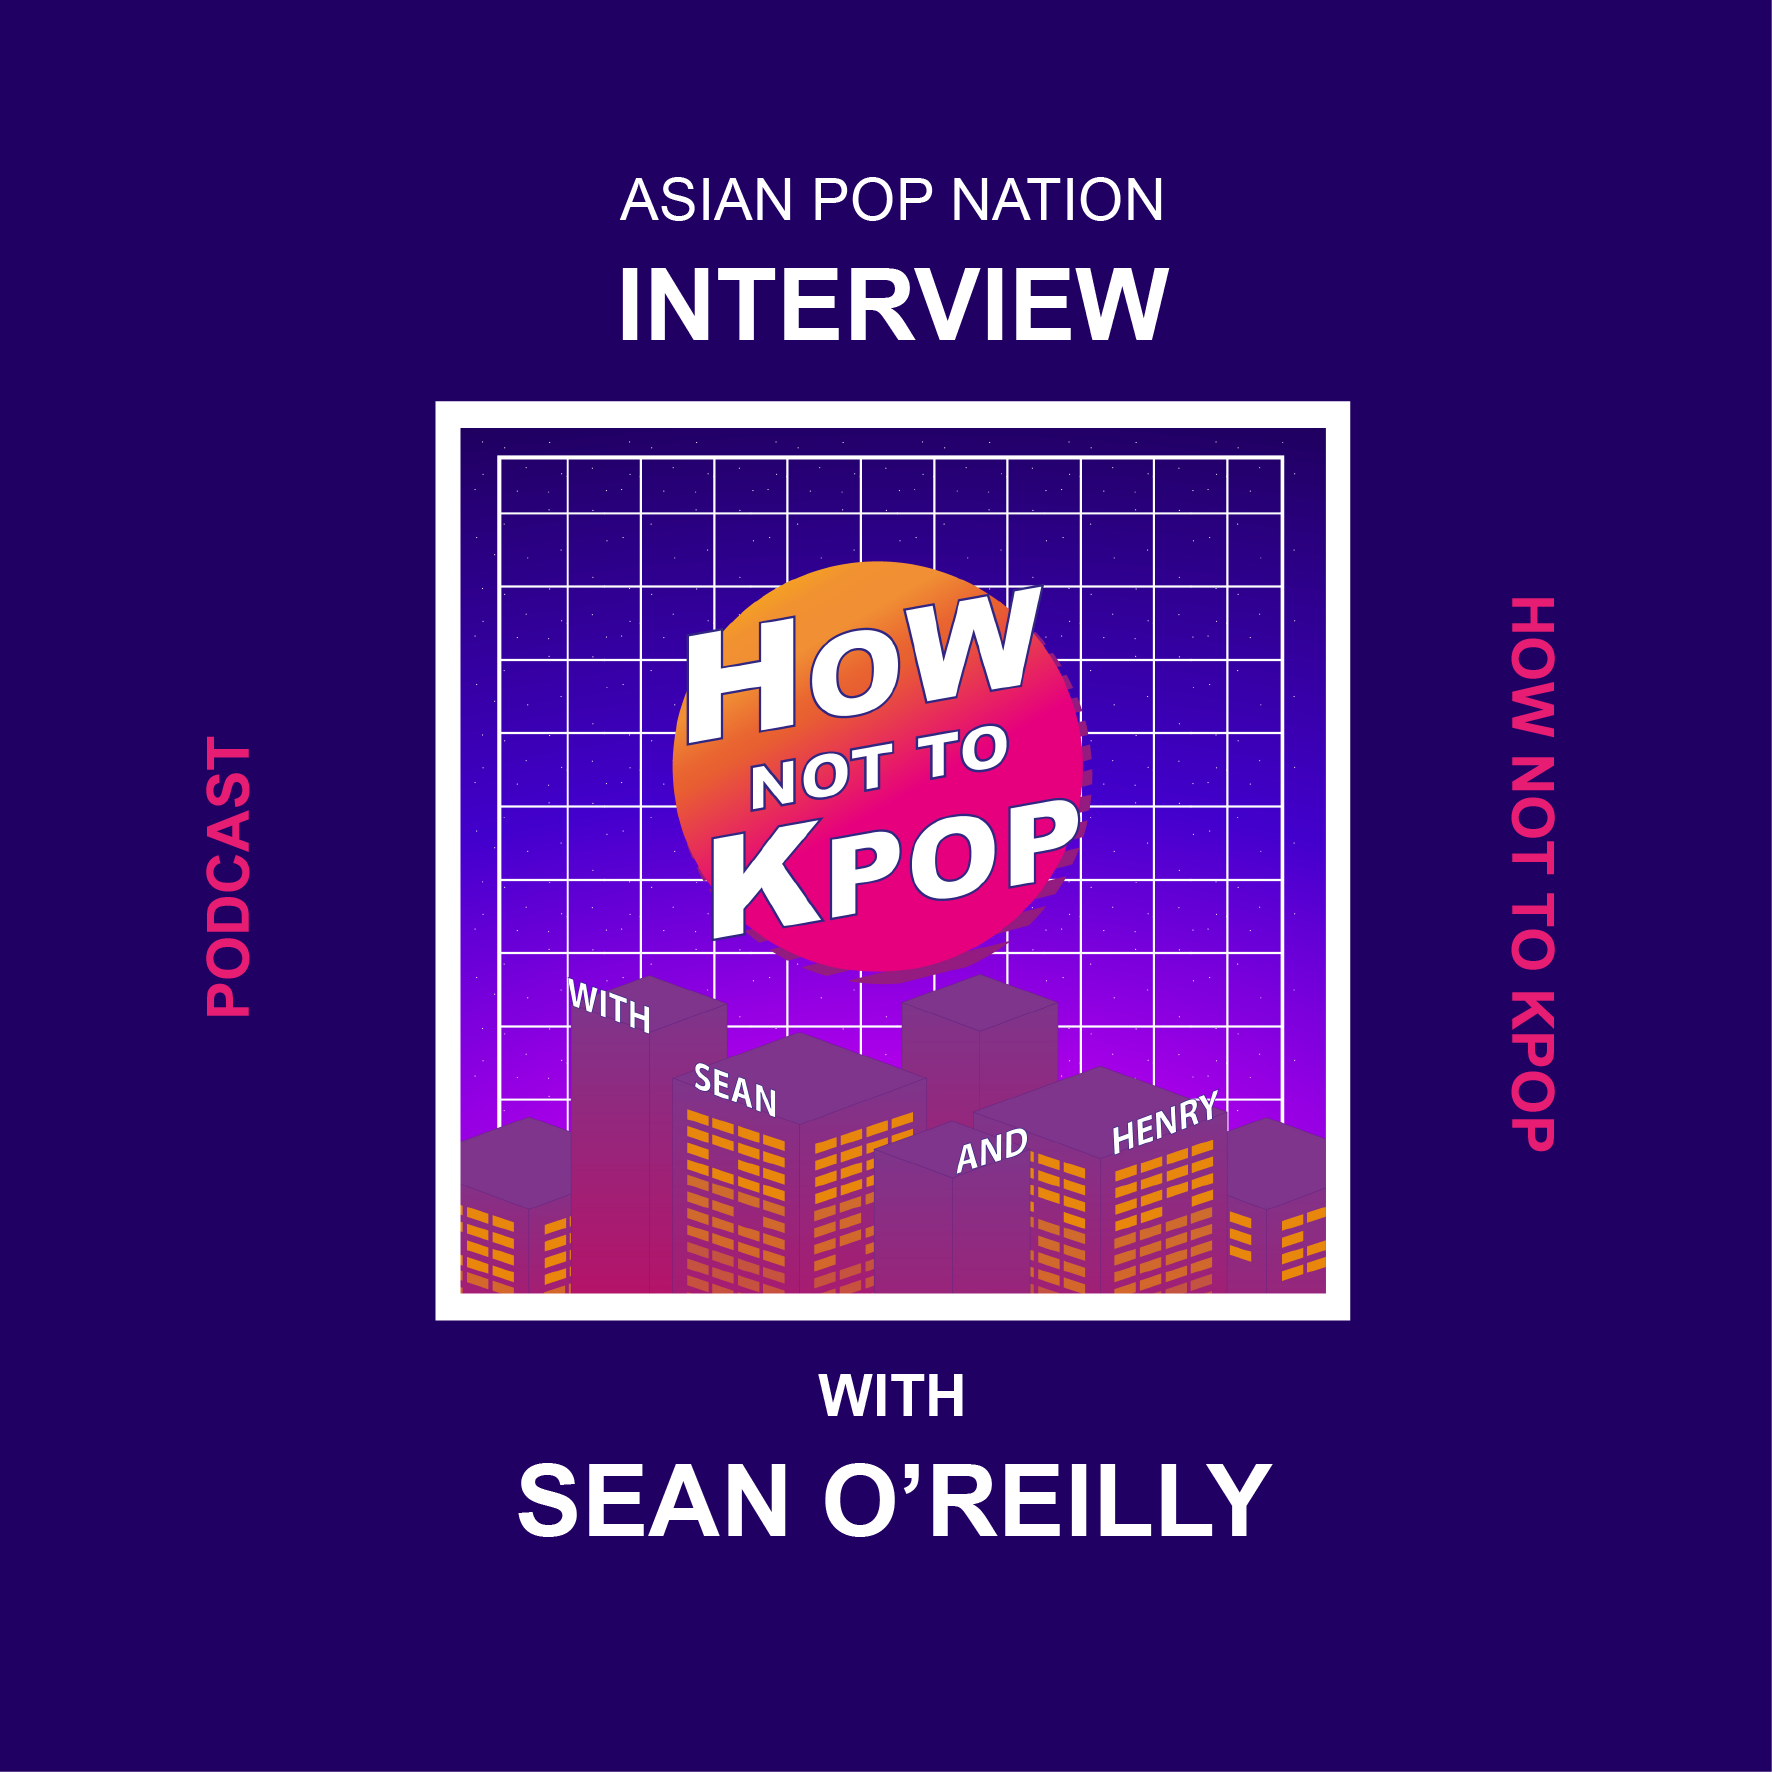 APN's Interview with Sean O'Reilly